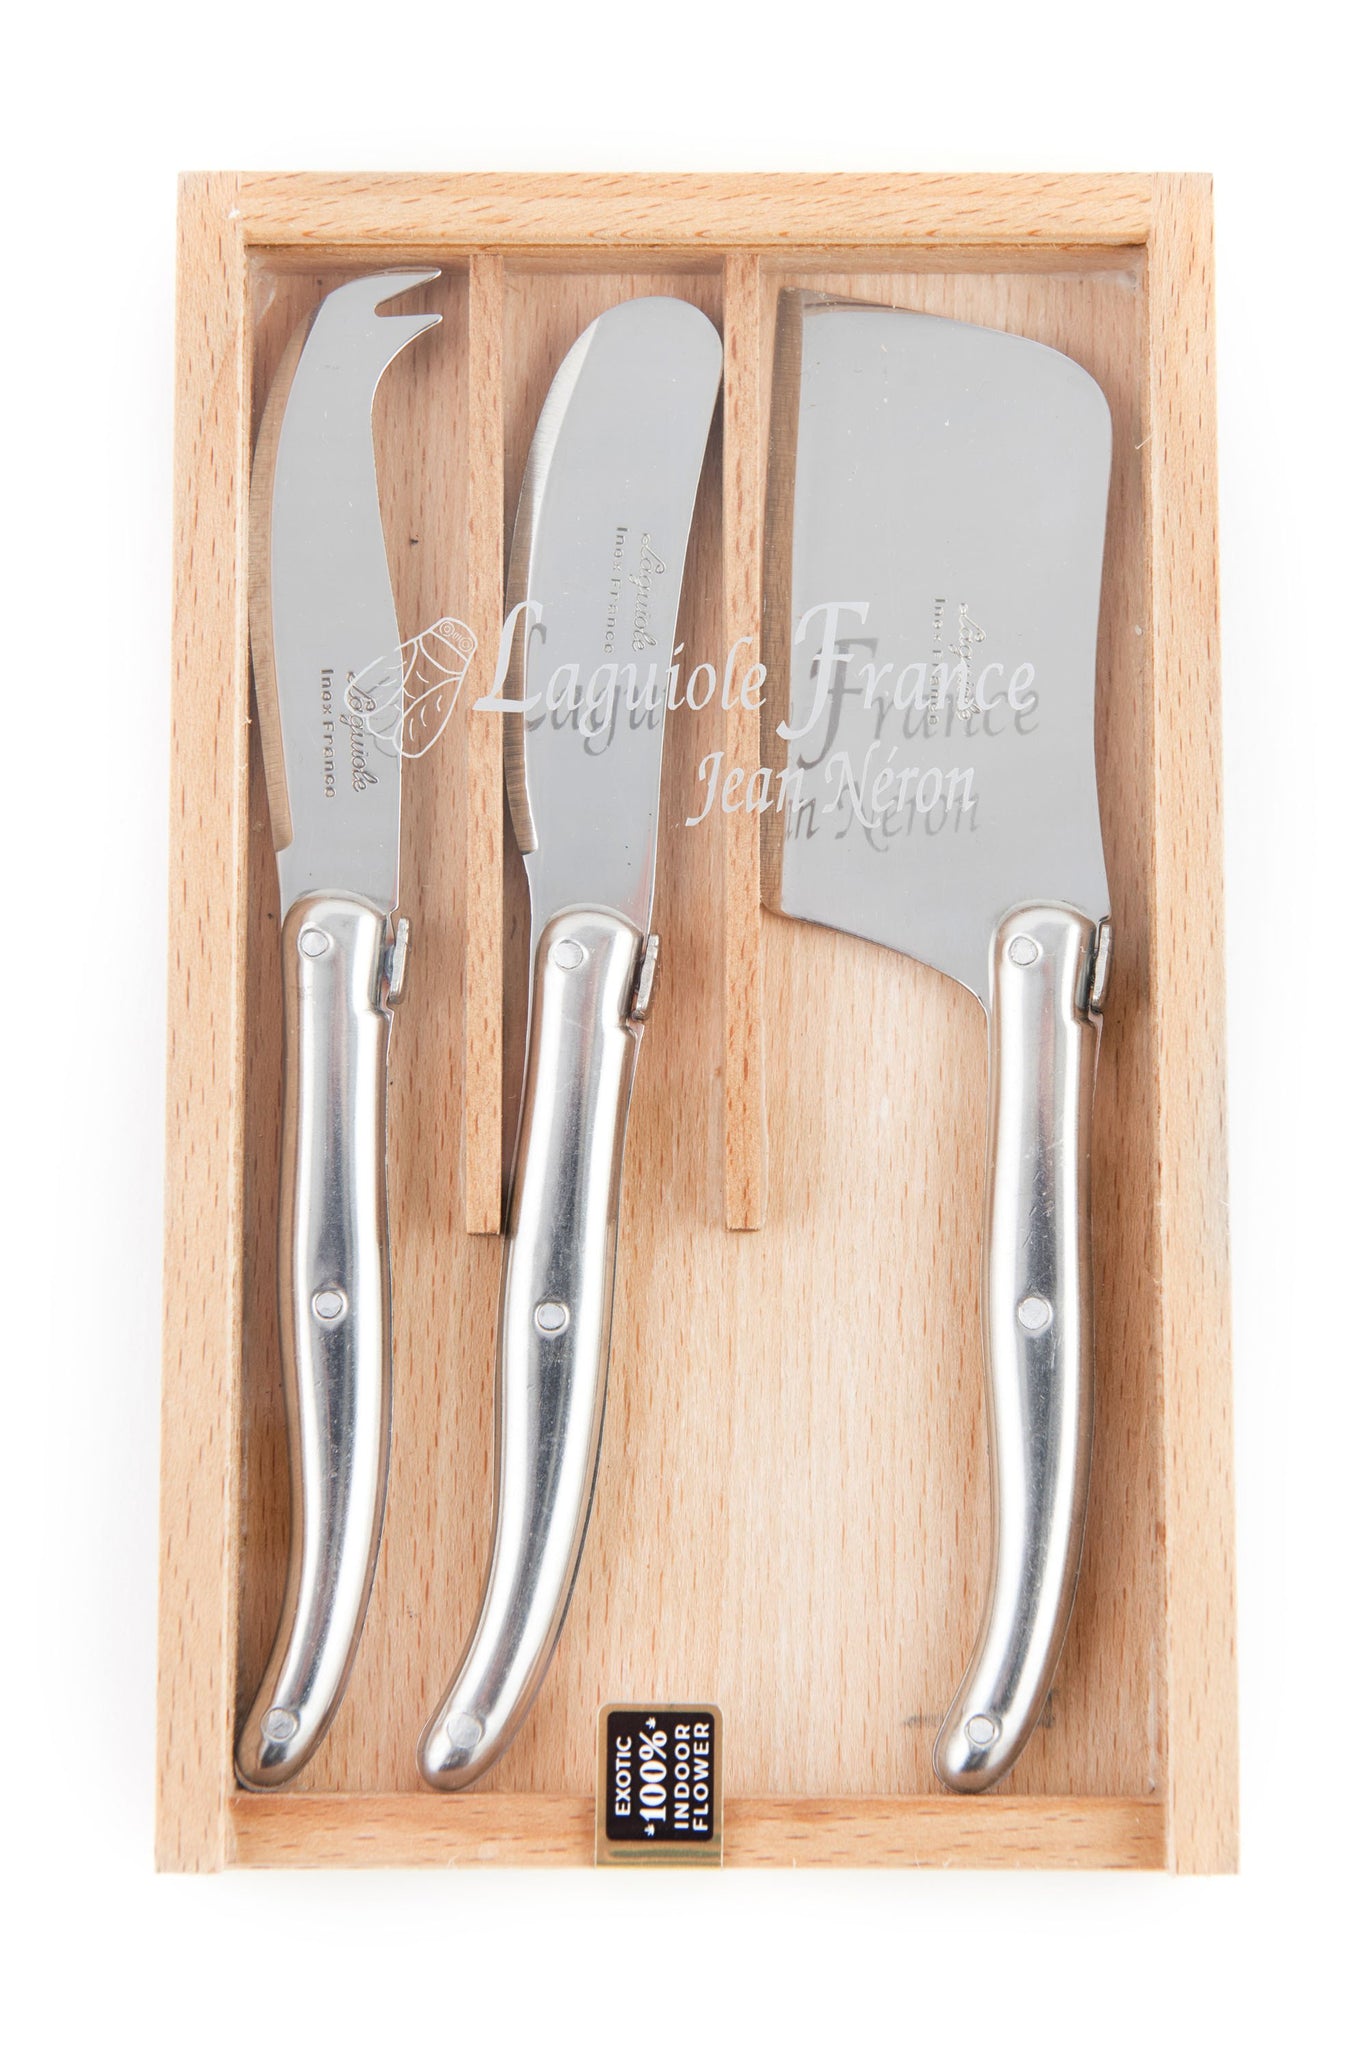 Laguiole 3 Piece Stainless Steel Mini Cheese Set in Wooden Box - French Dry Goods